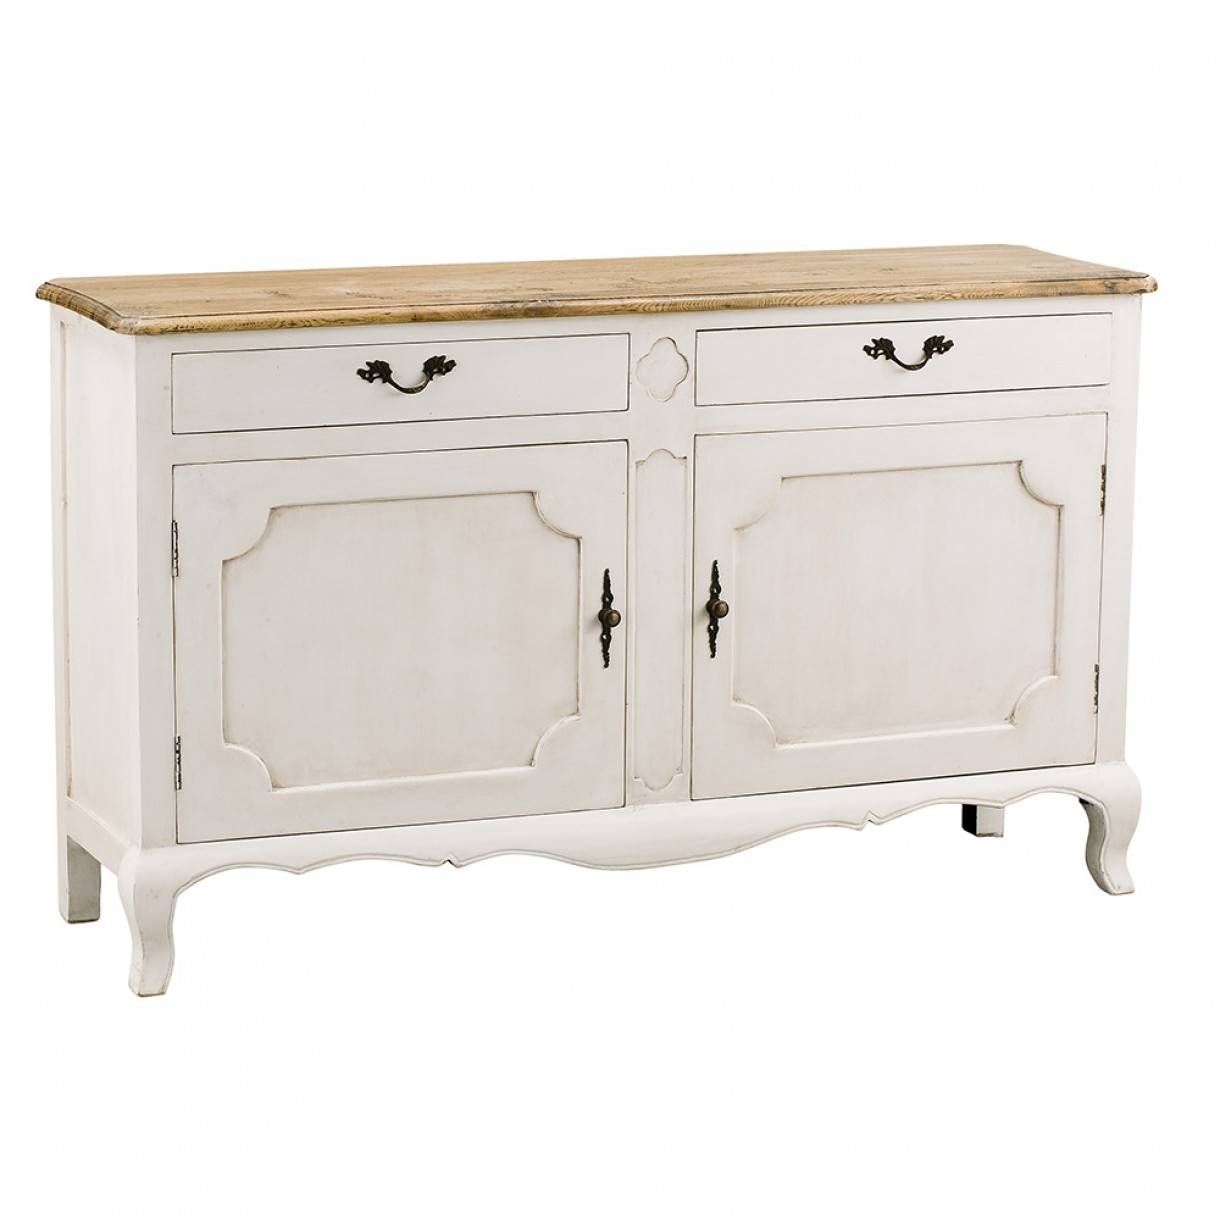 Sideboards: Marvellous White Sideboards Furniture Antique White For White Sideboard Furniture (View 13 of 15)